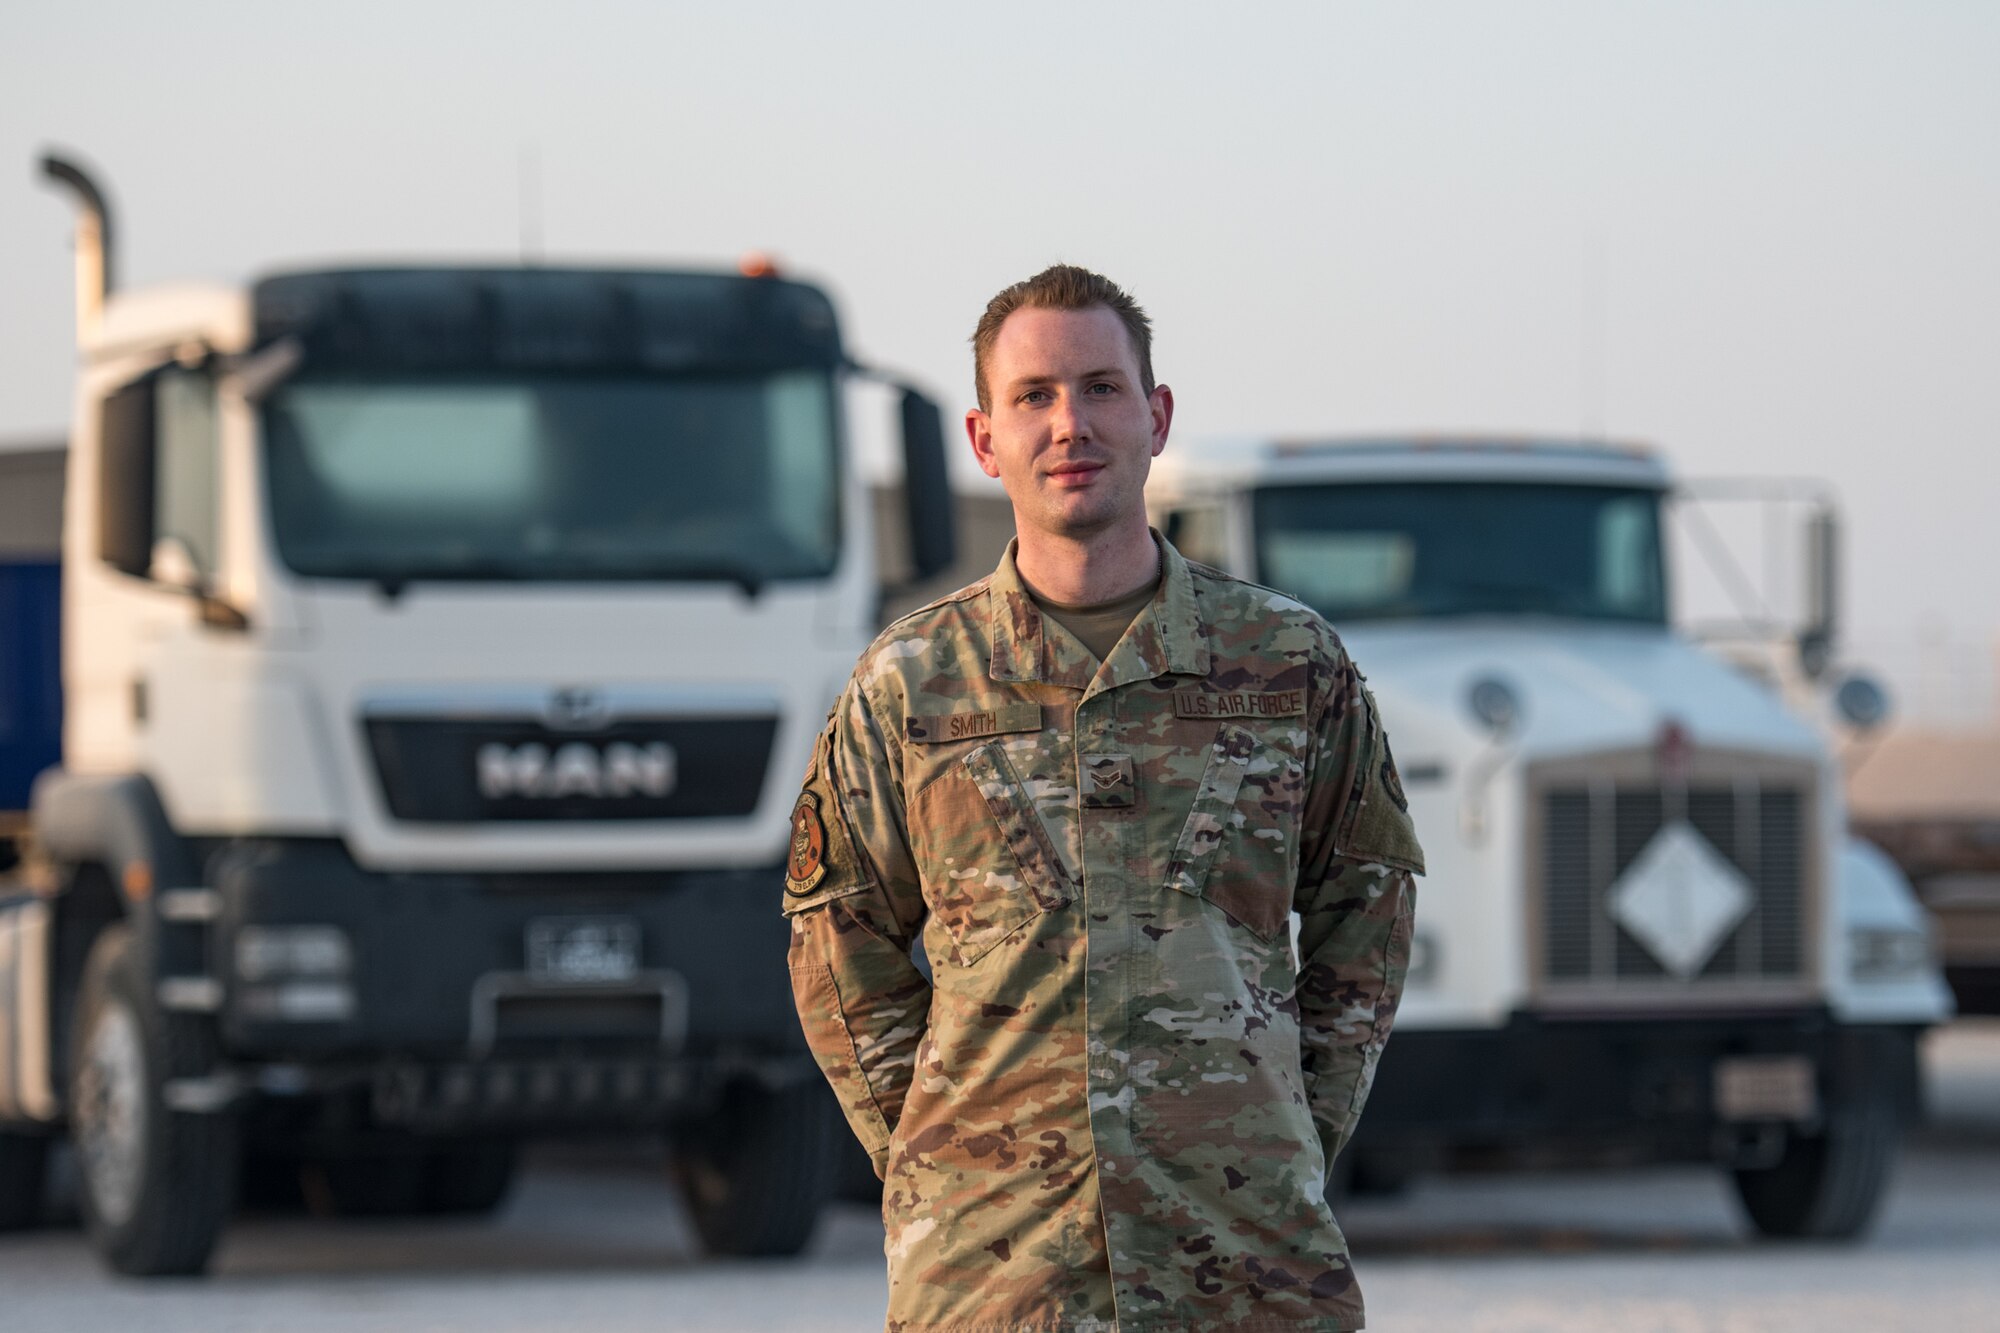 An airman poses for a portrait